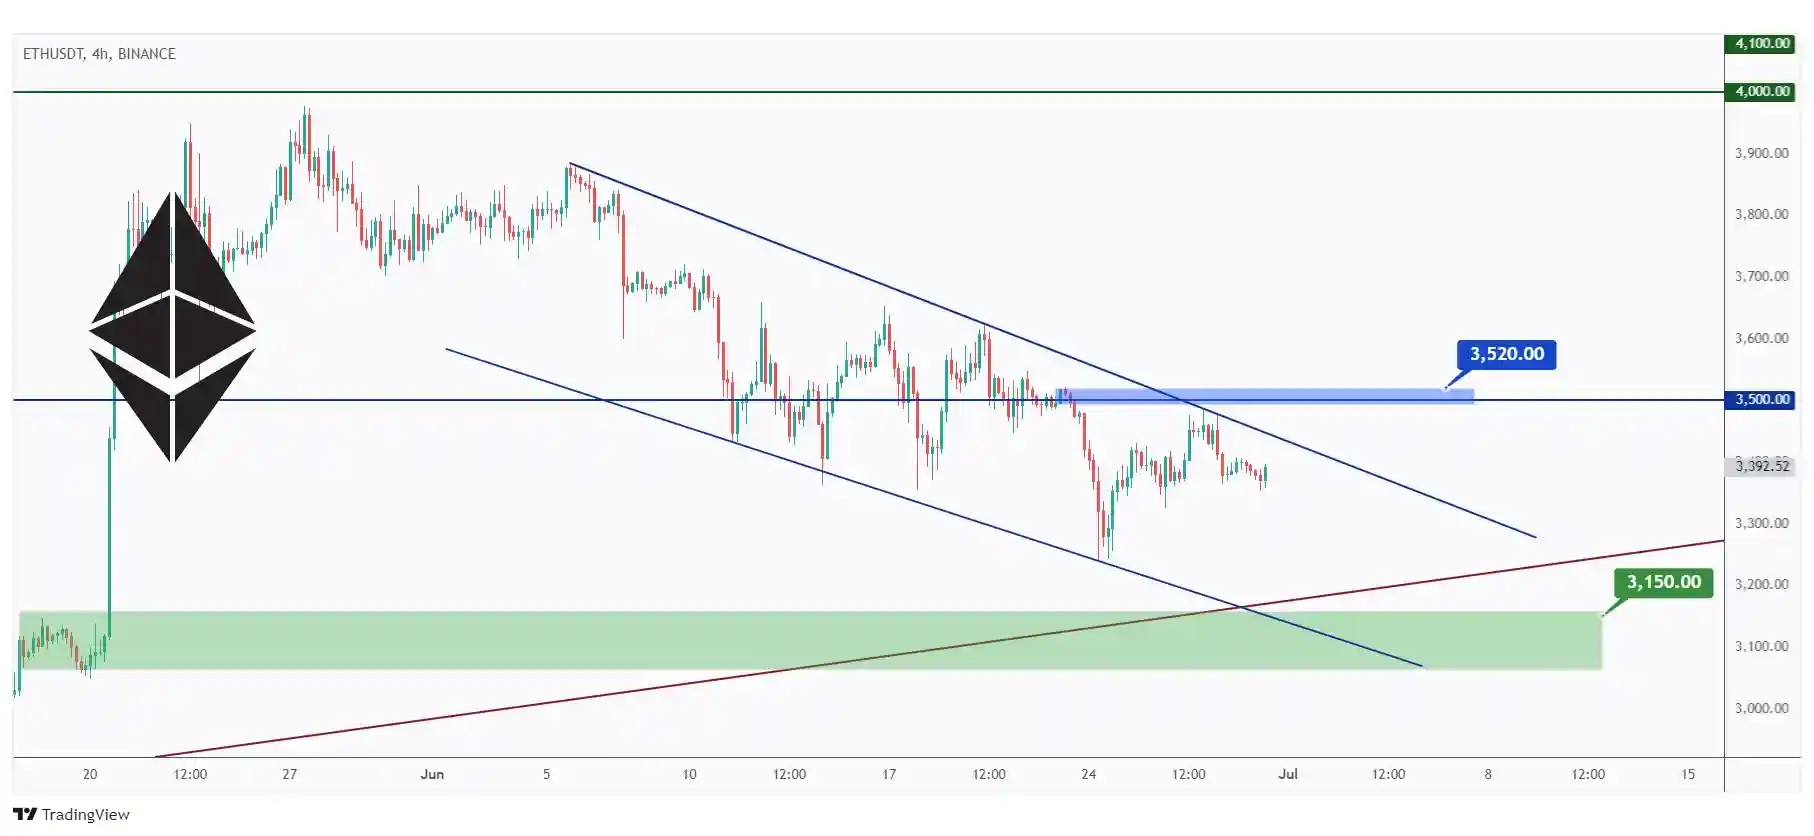 ETH 4h chart overall bearish as long as the last high at $3,520 holds.